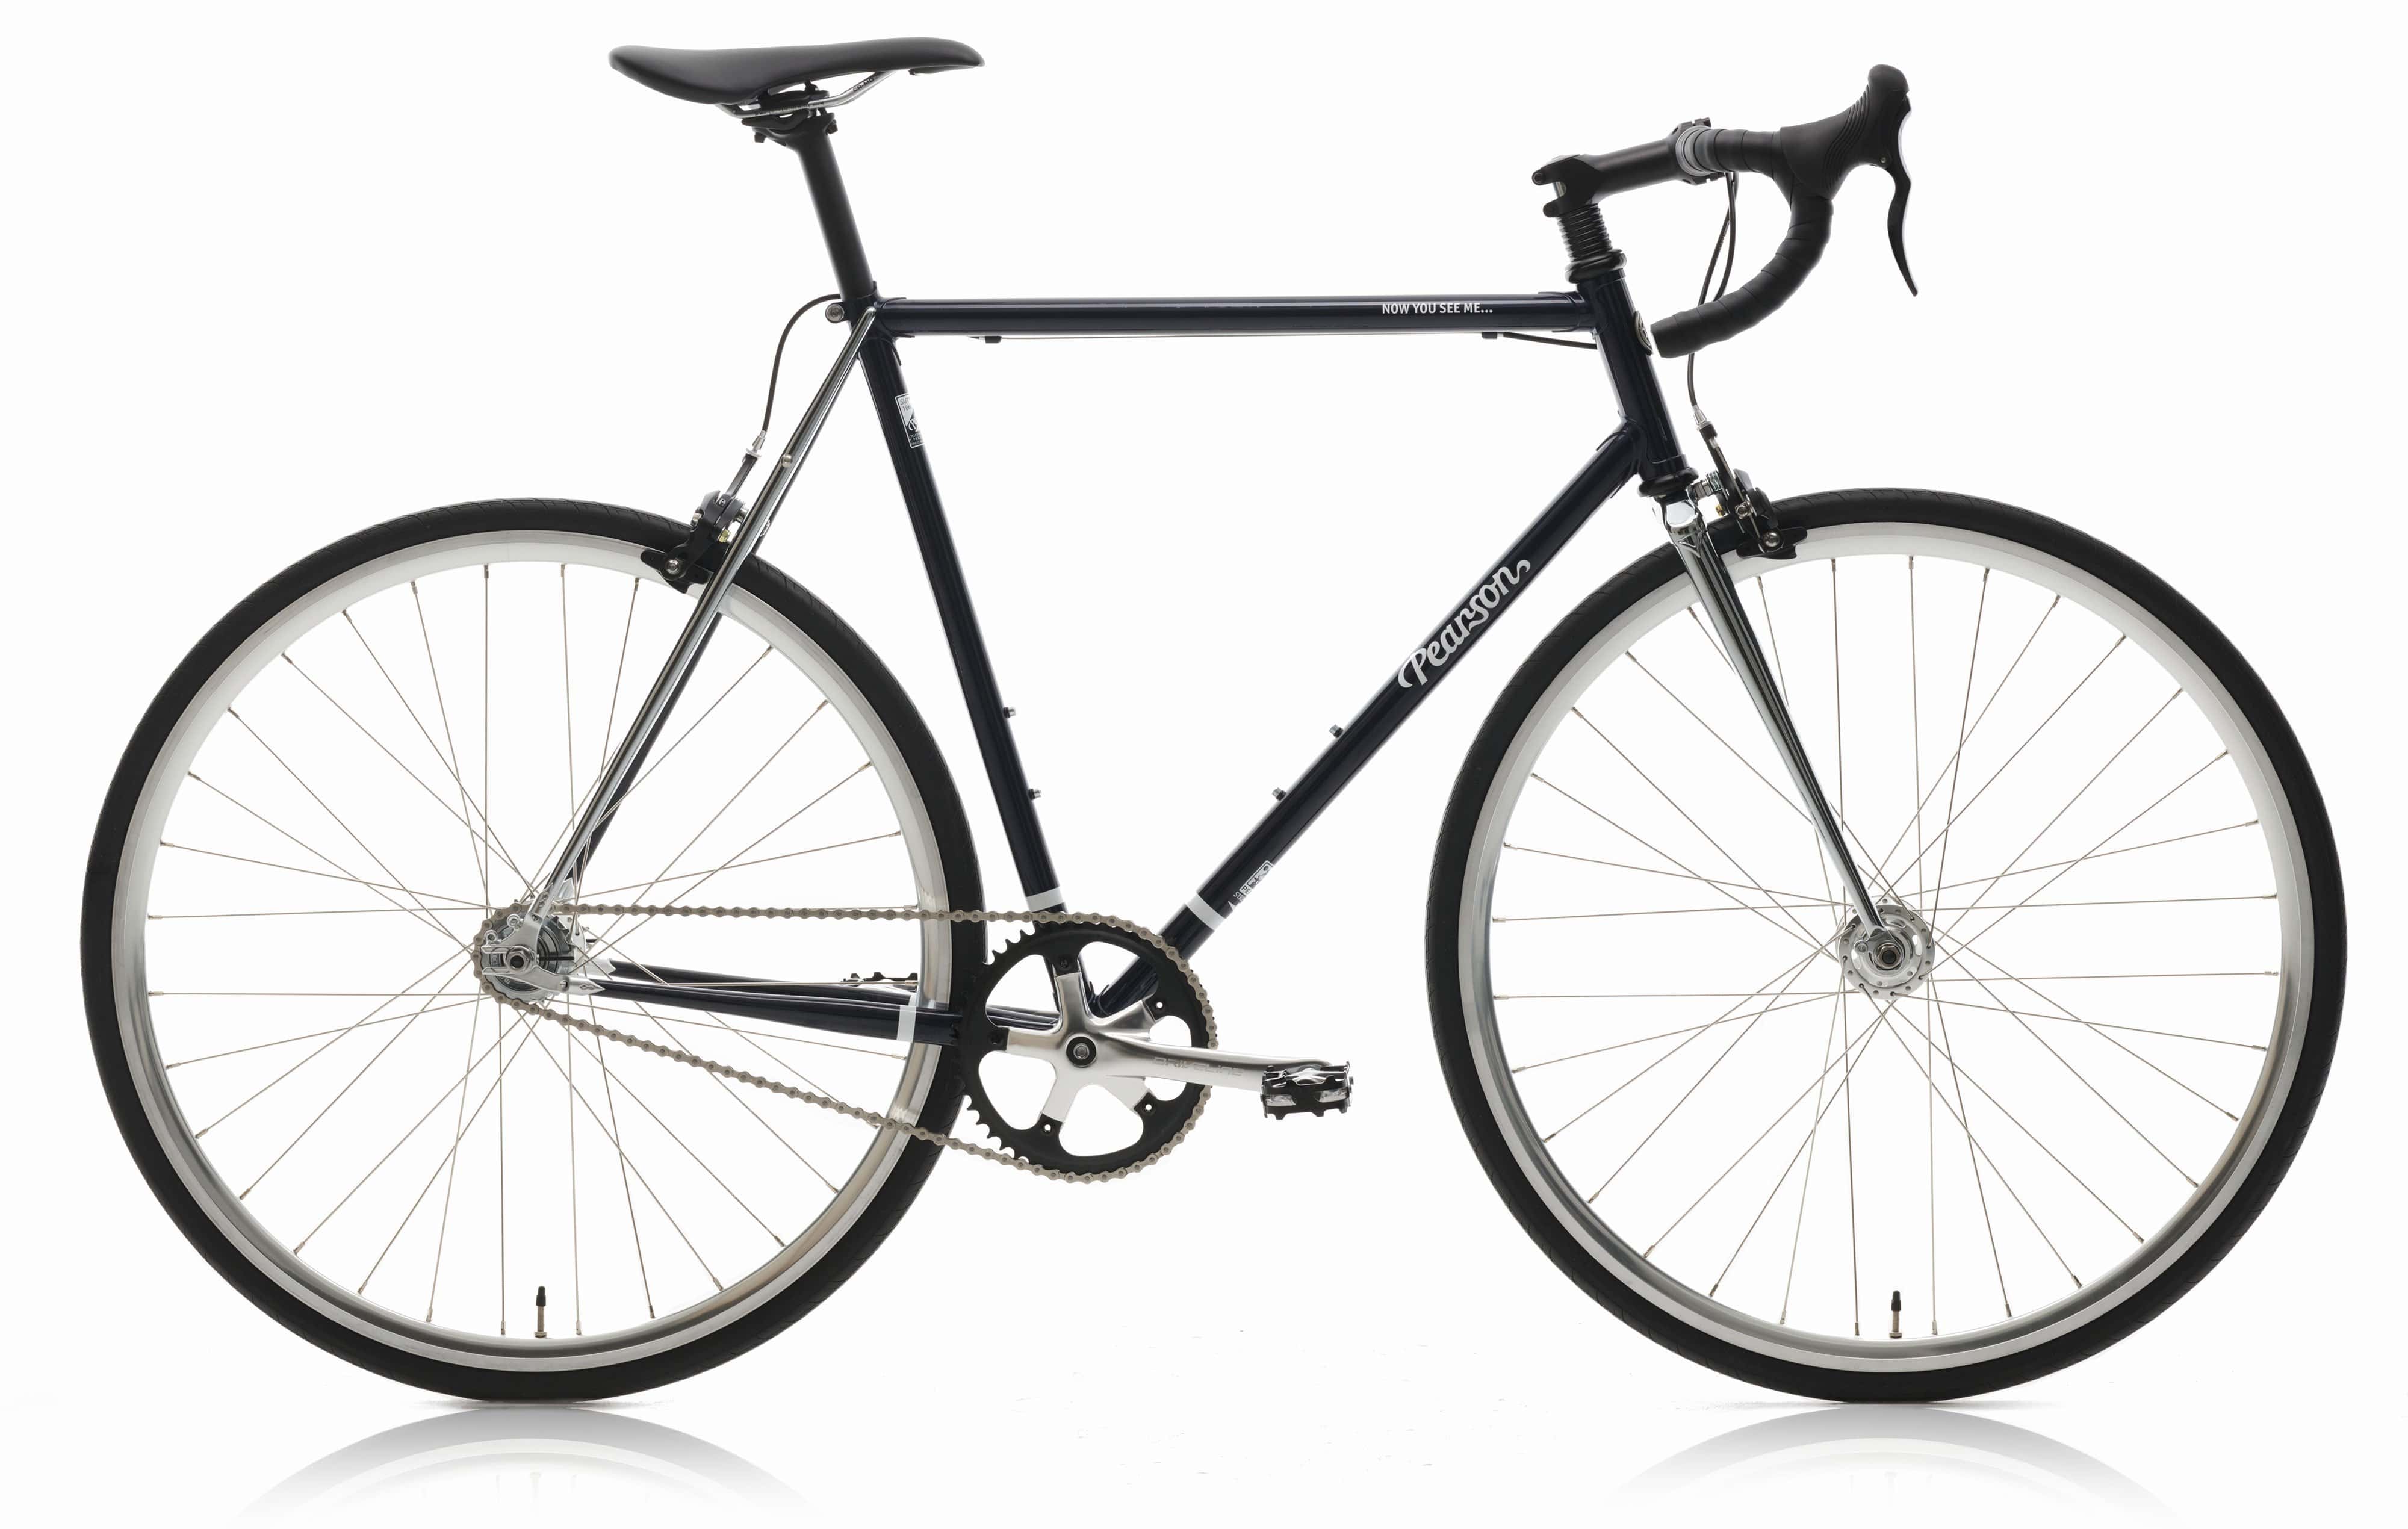 Pcs  Now You See Me - Steel Single Speed Bike  Continental Gator Hardshell 28mm / Without Mudguards / Large